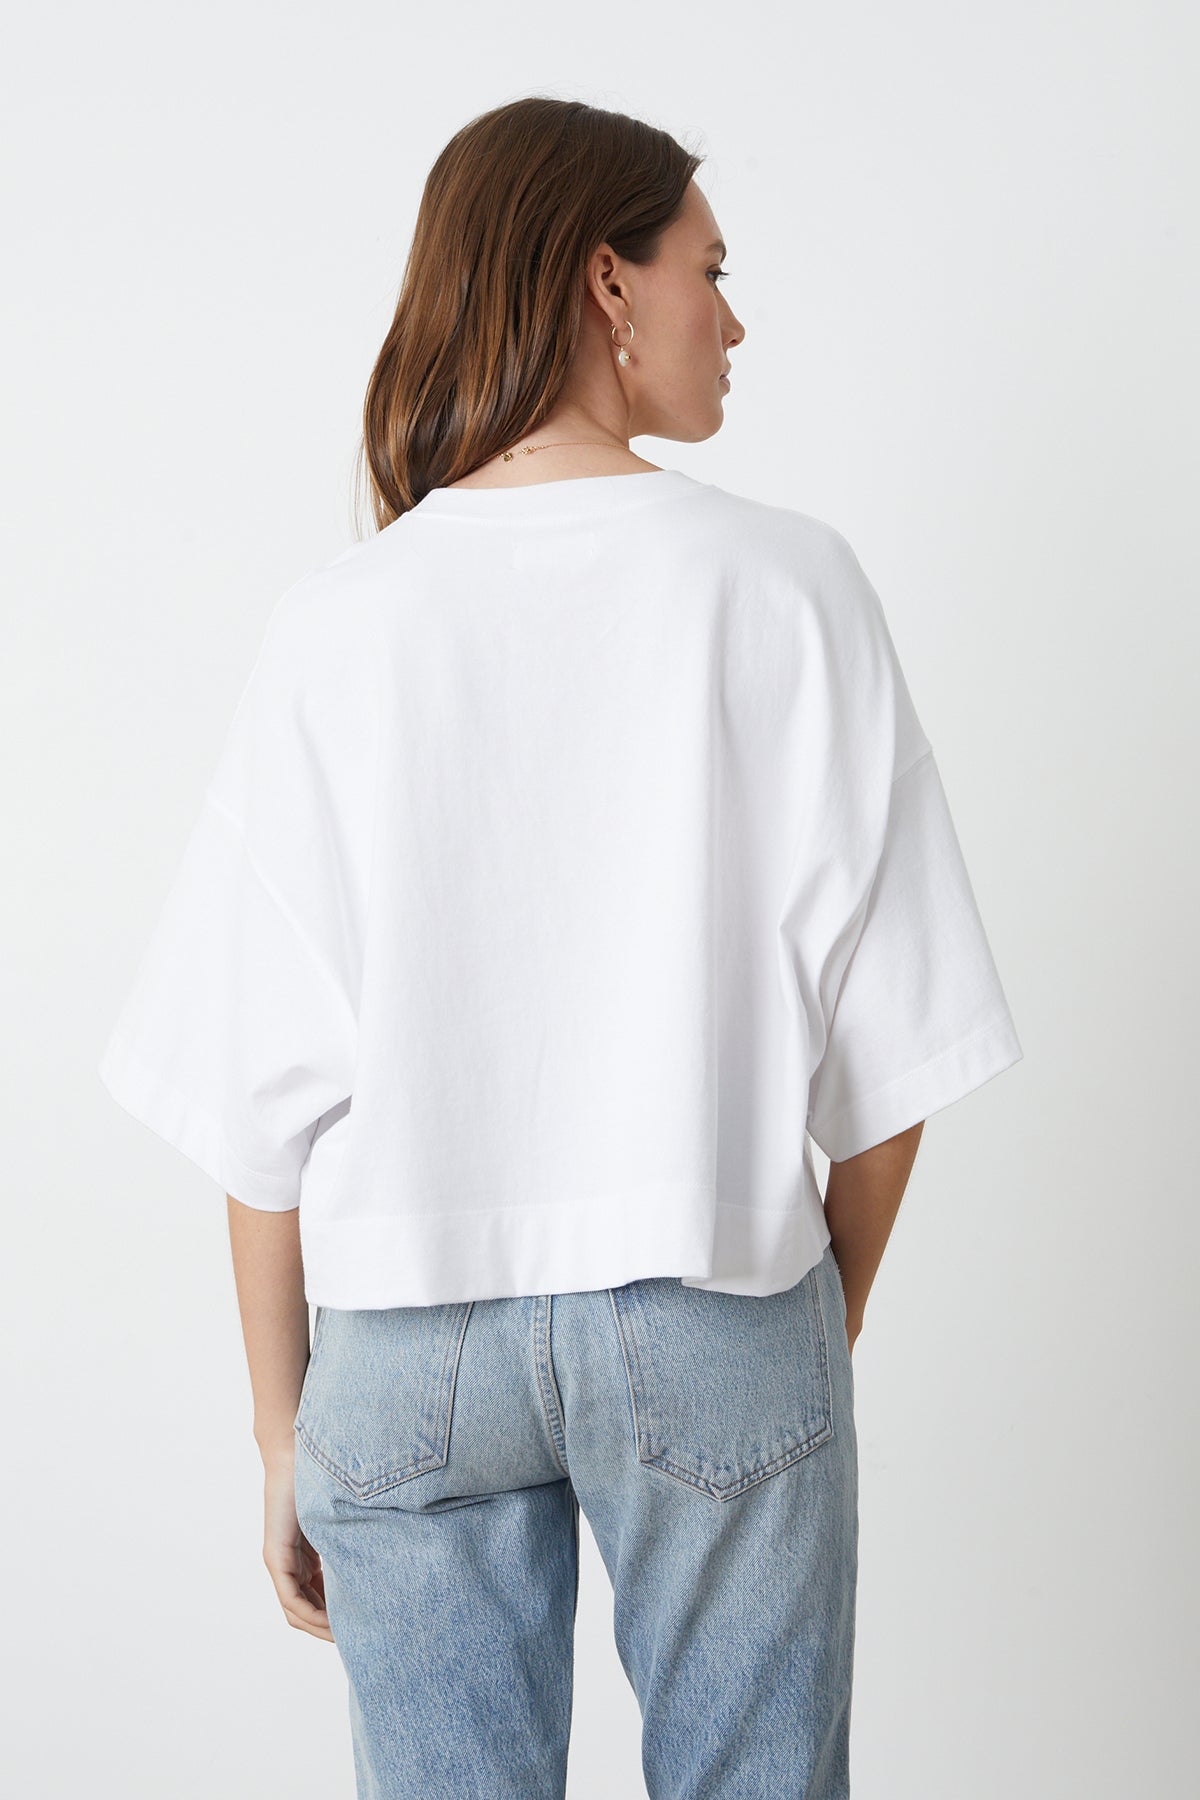   Aimee Cropped Tee with blue denim back 